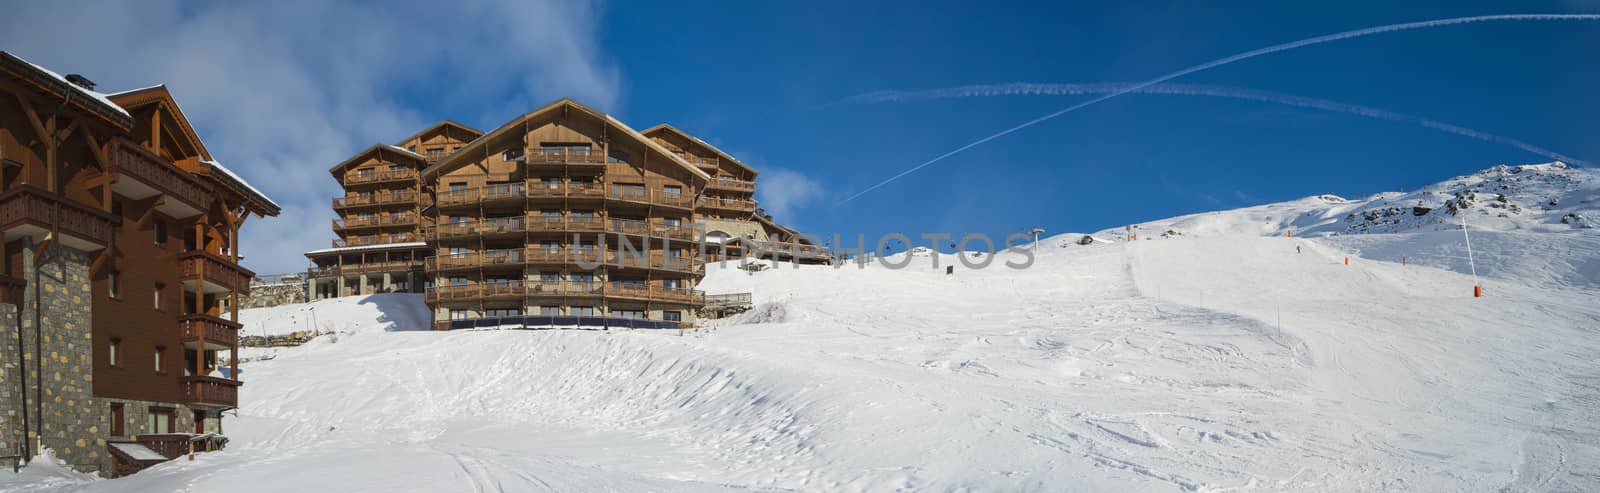 Panoramic view of snow covered piste in an alpine ski resort with apartment buildings on slope